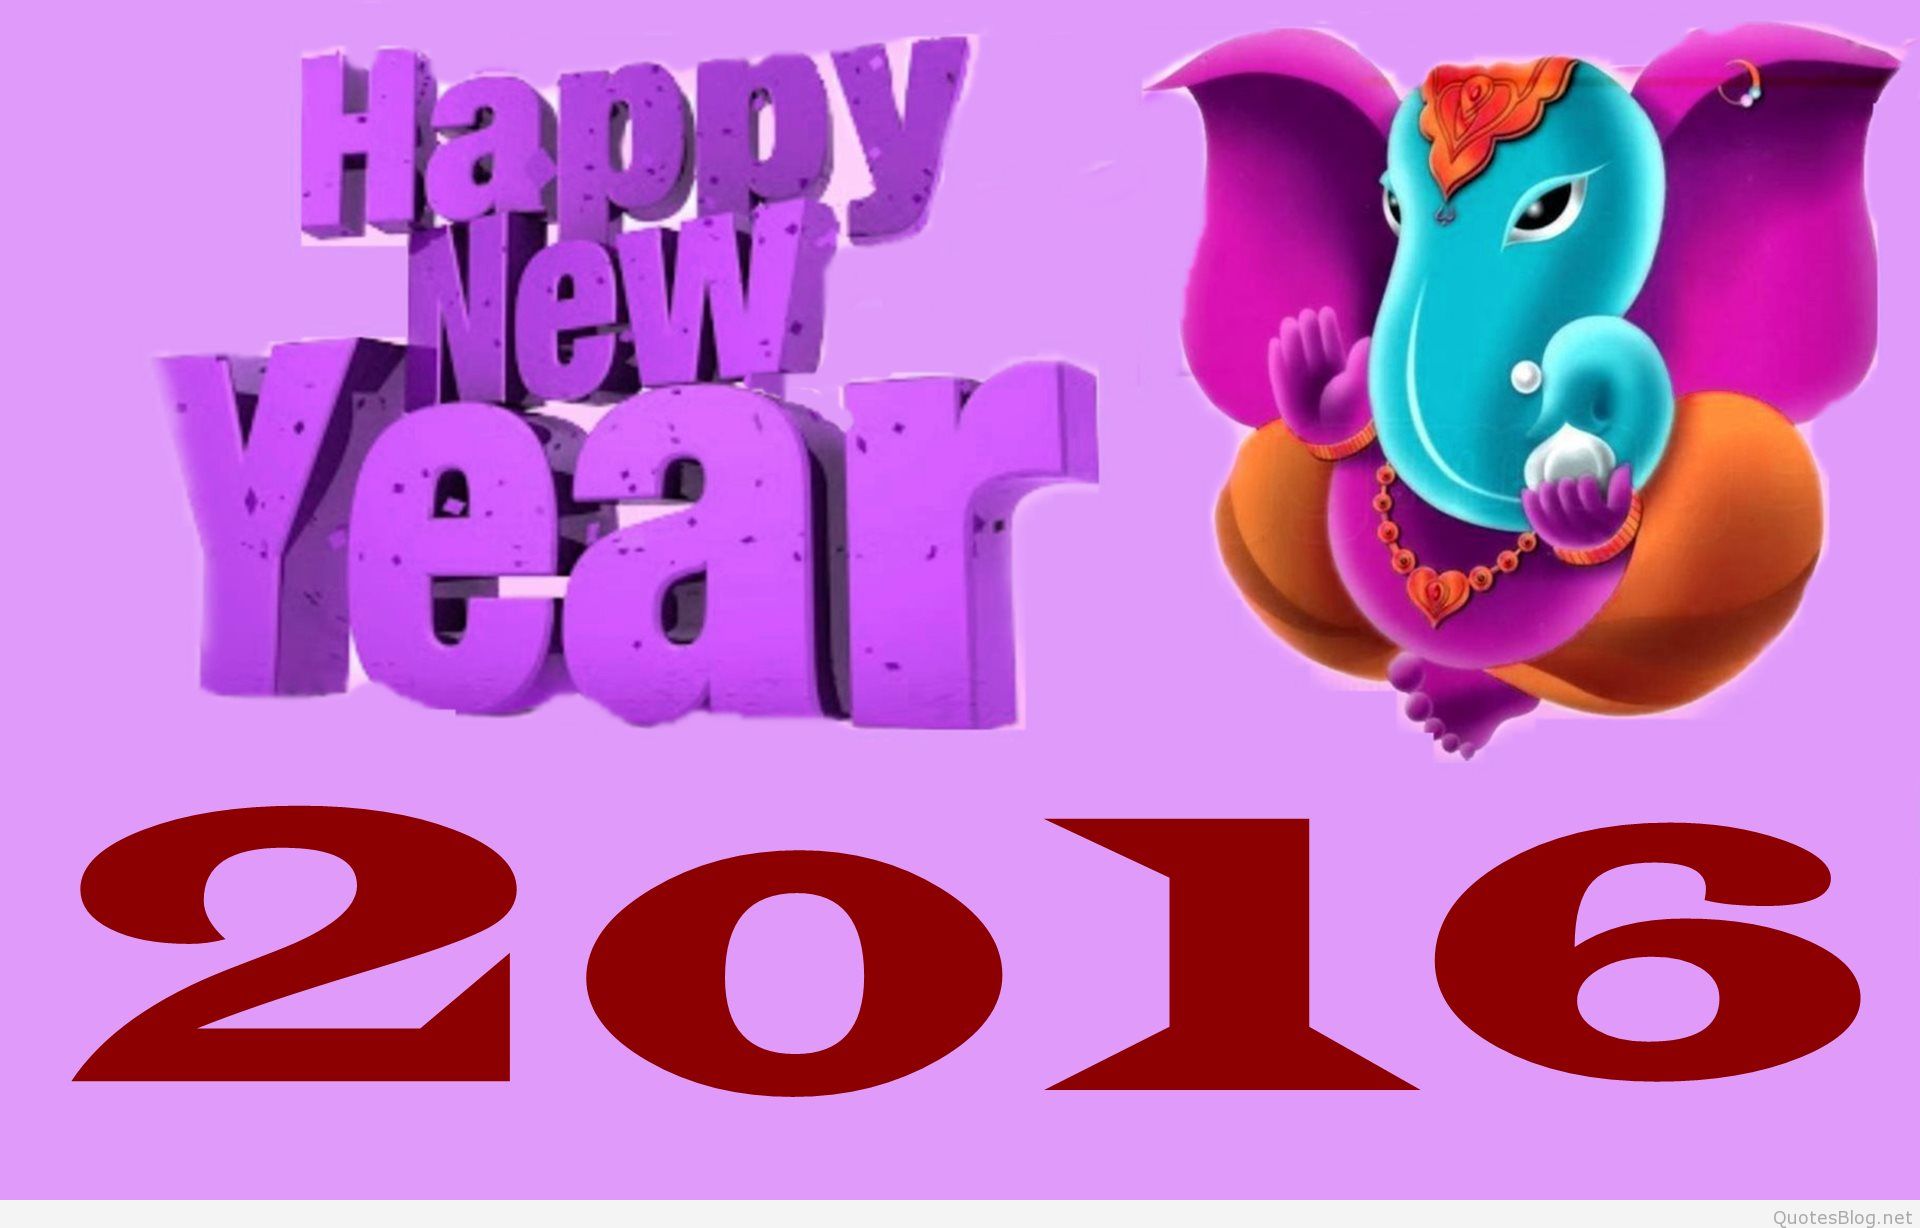 Happy New Year Wallpaper Quotes